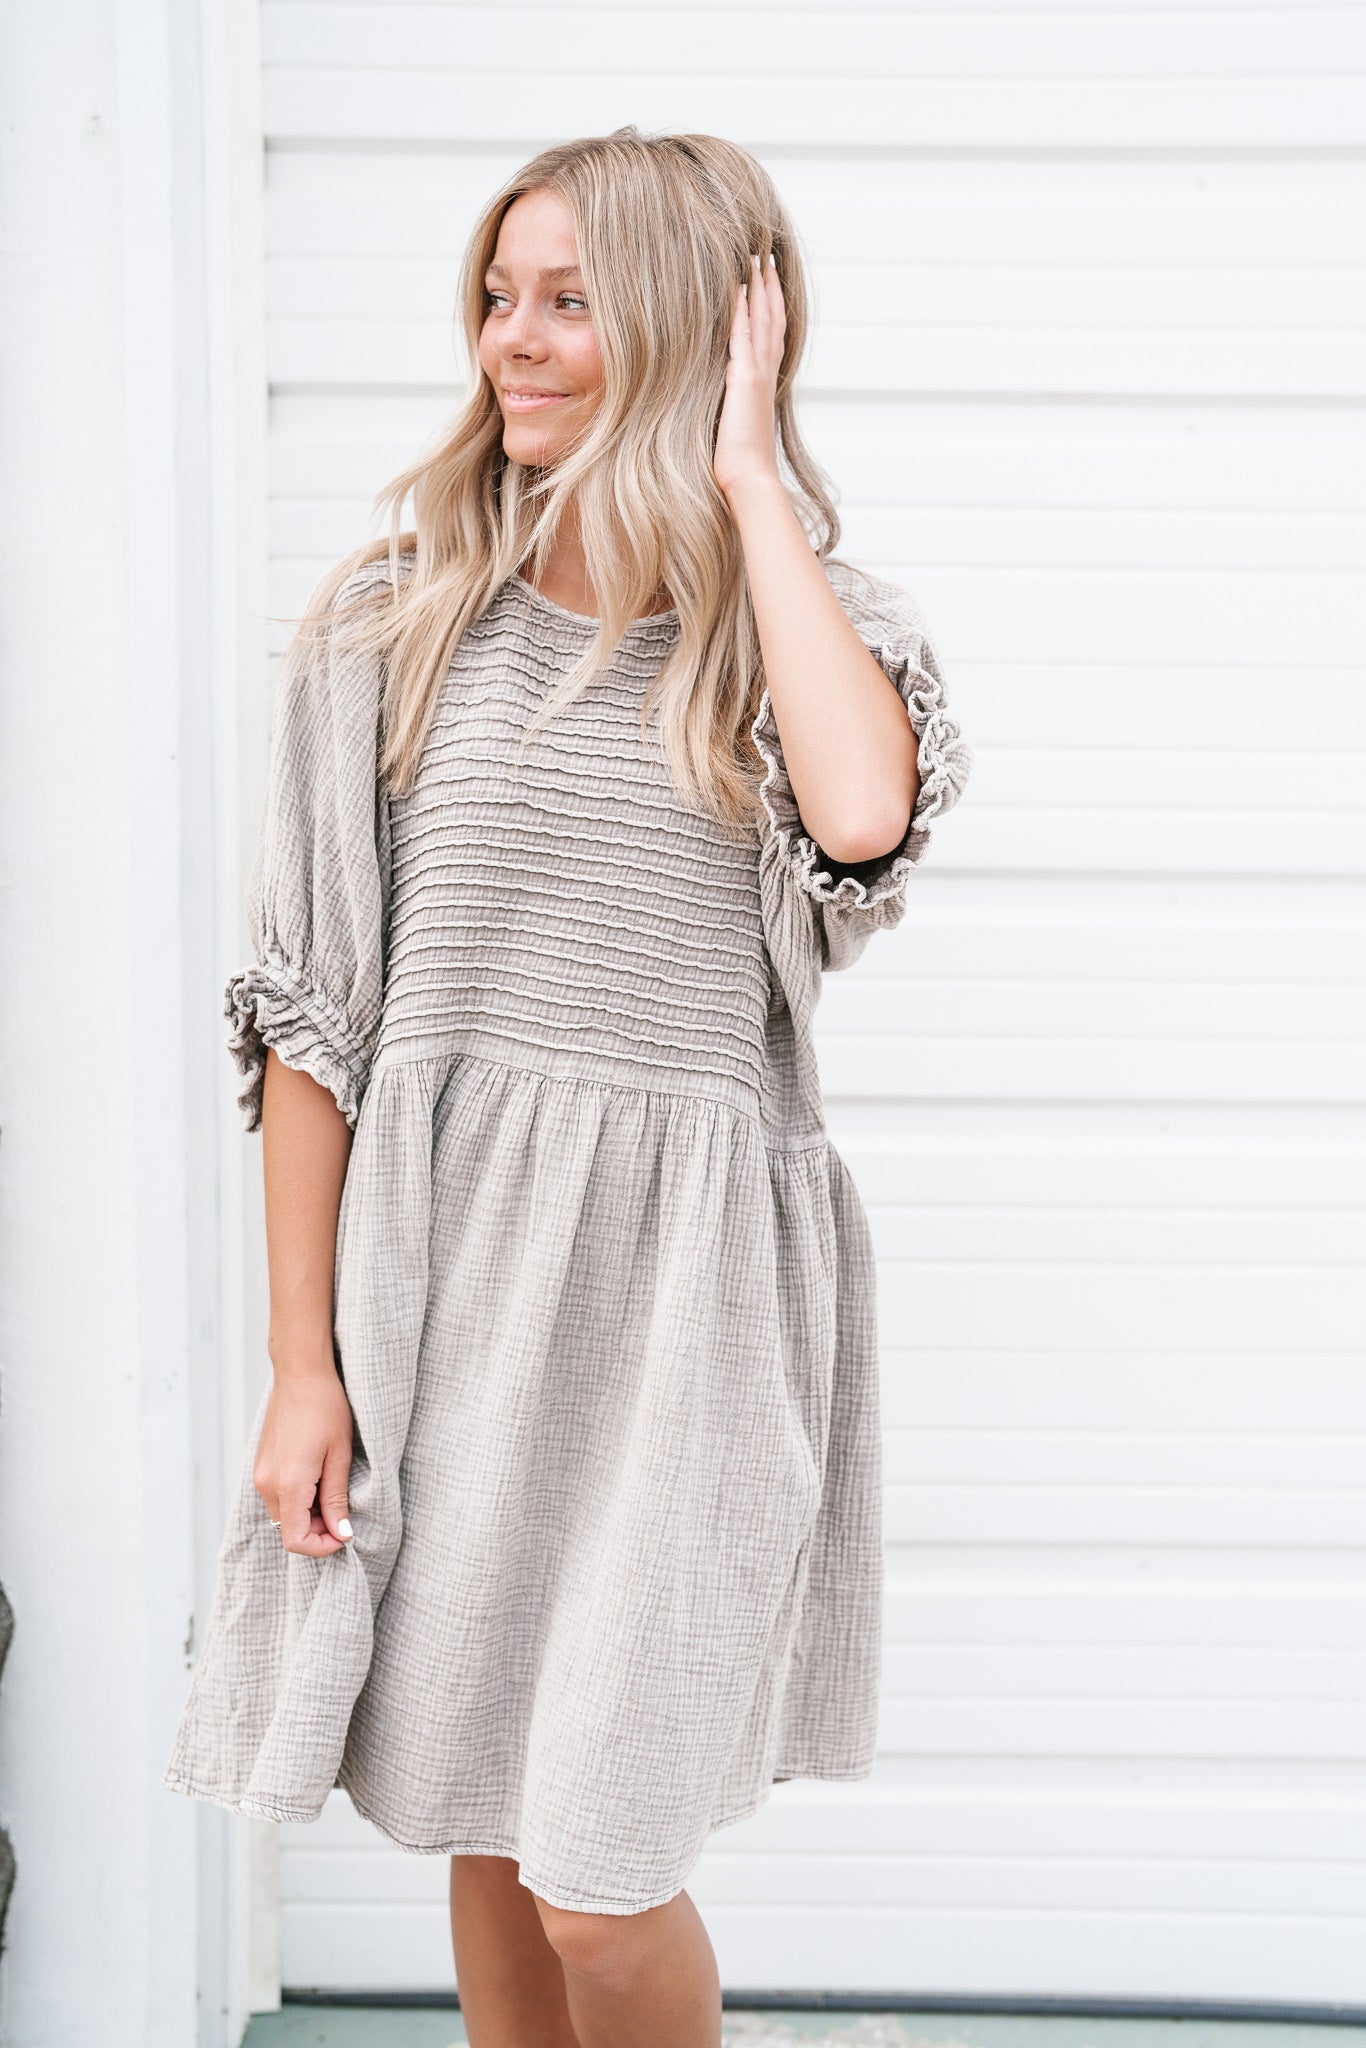 Stay Awhile Textured Mini Dress